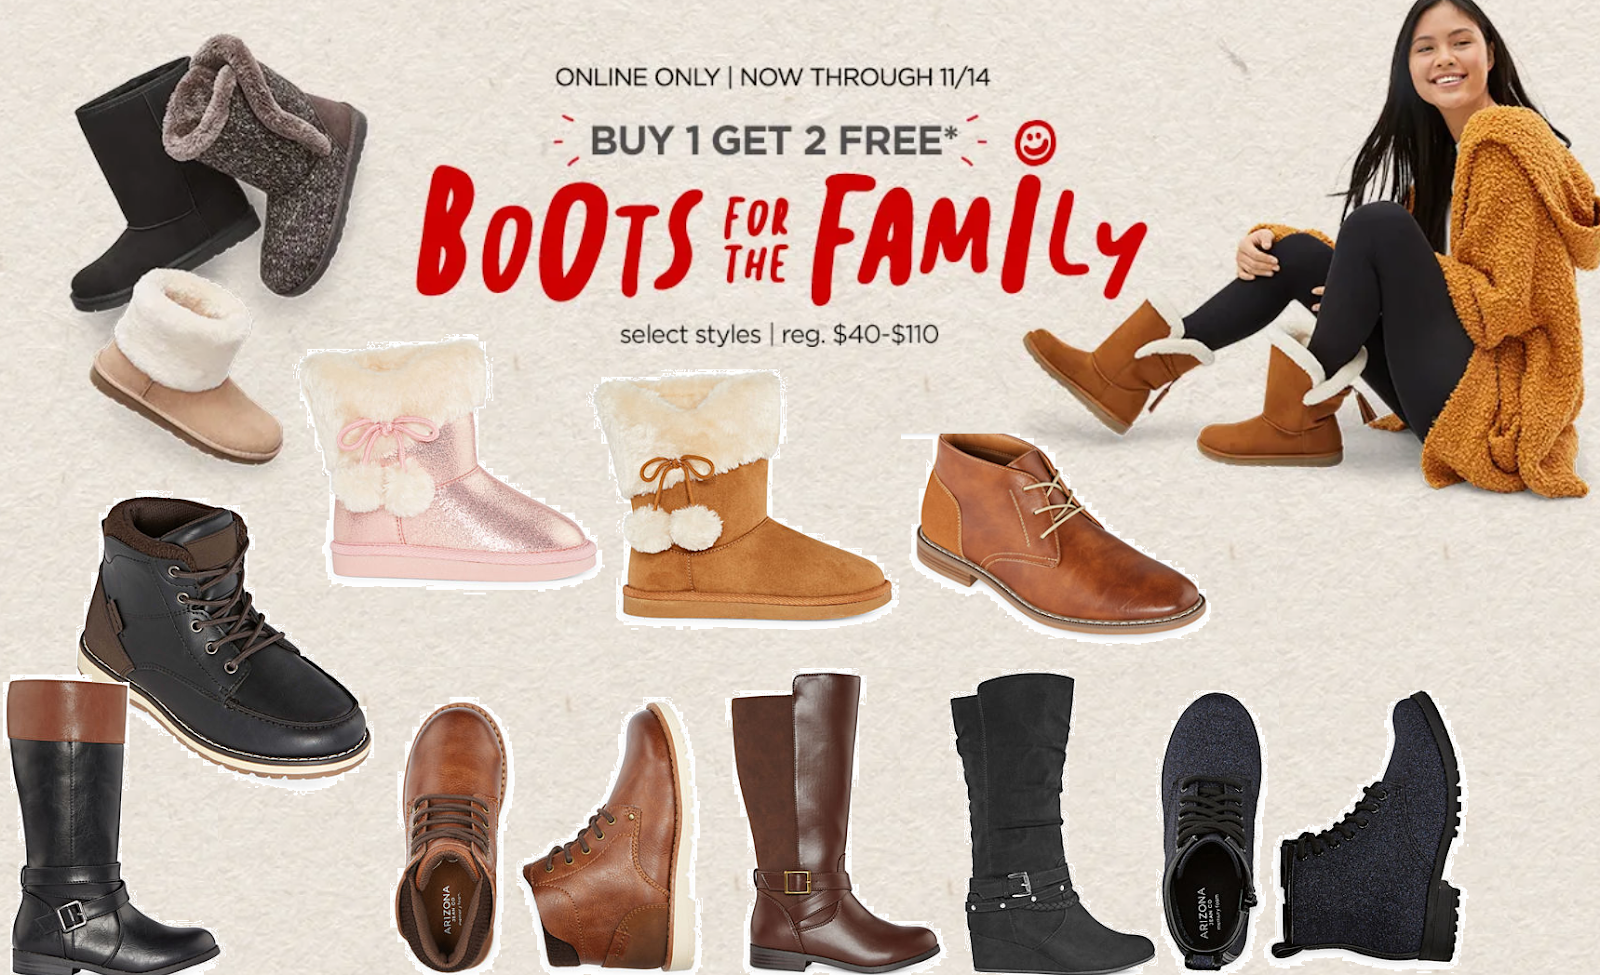 JCPenney Boots Buy 1 Get 2 Free Sale! 3 Pairs of Girls' Boots 40, 3